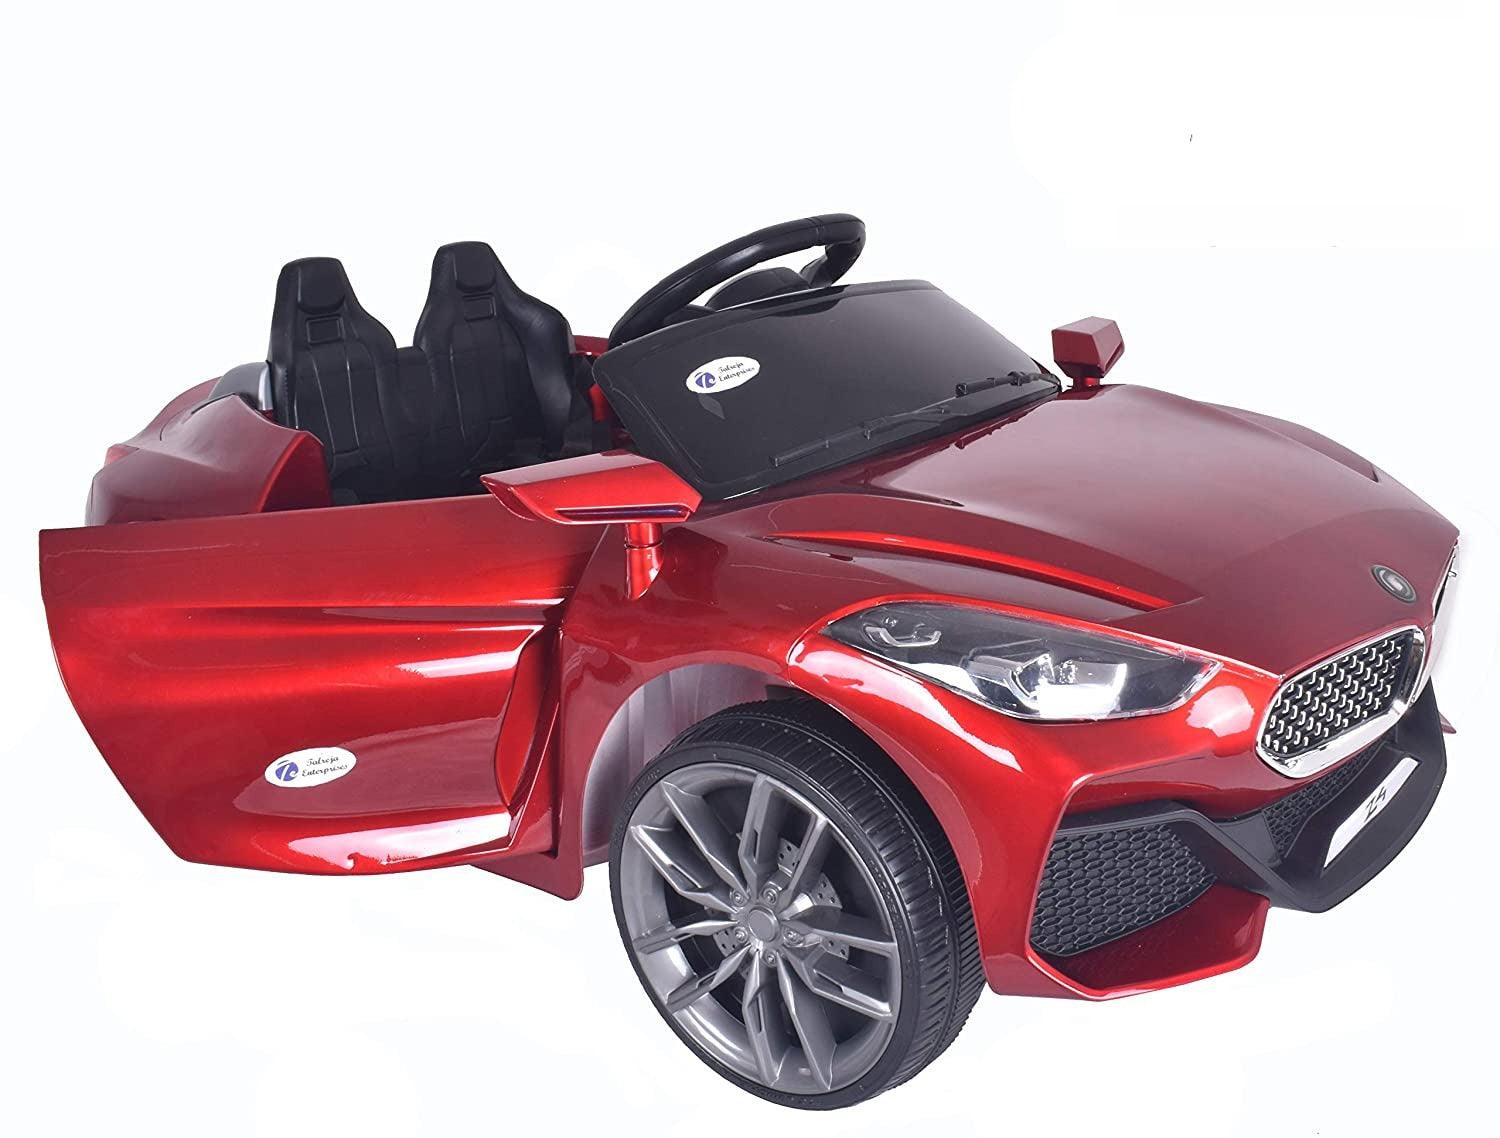 12V 2 Motors Fiesta Z4 Battery Operated Ride on Car for Kids | Self drive & Remote Control with Mobile App - 11Cart